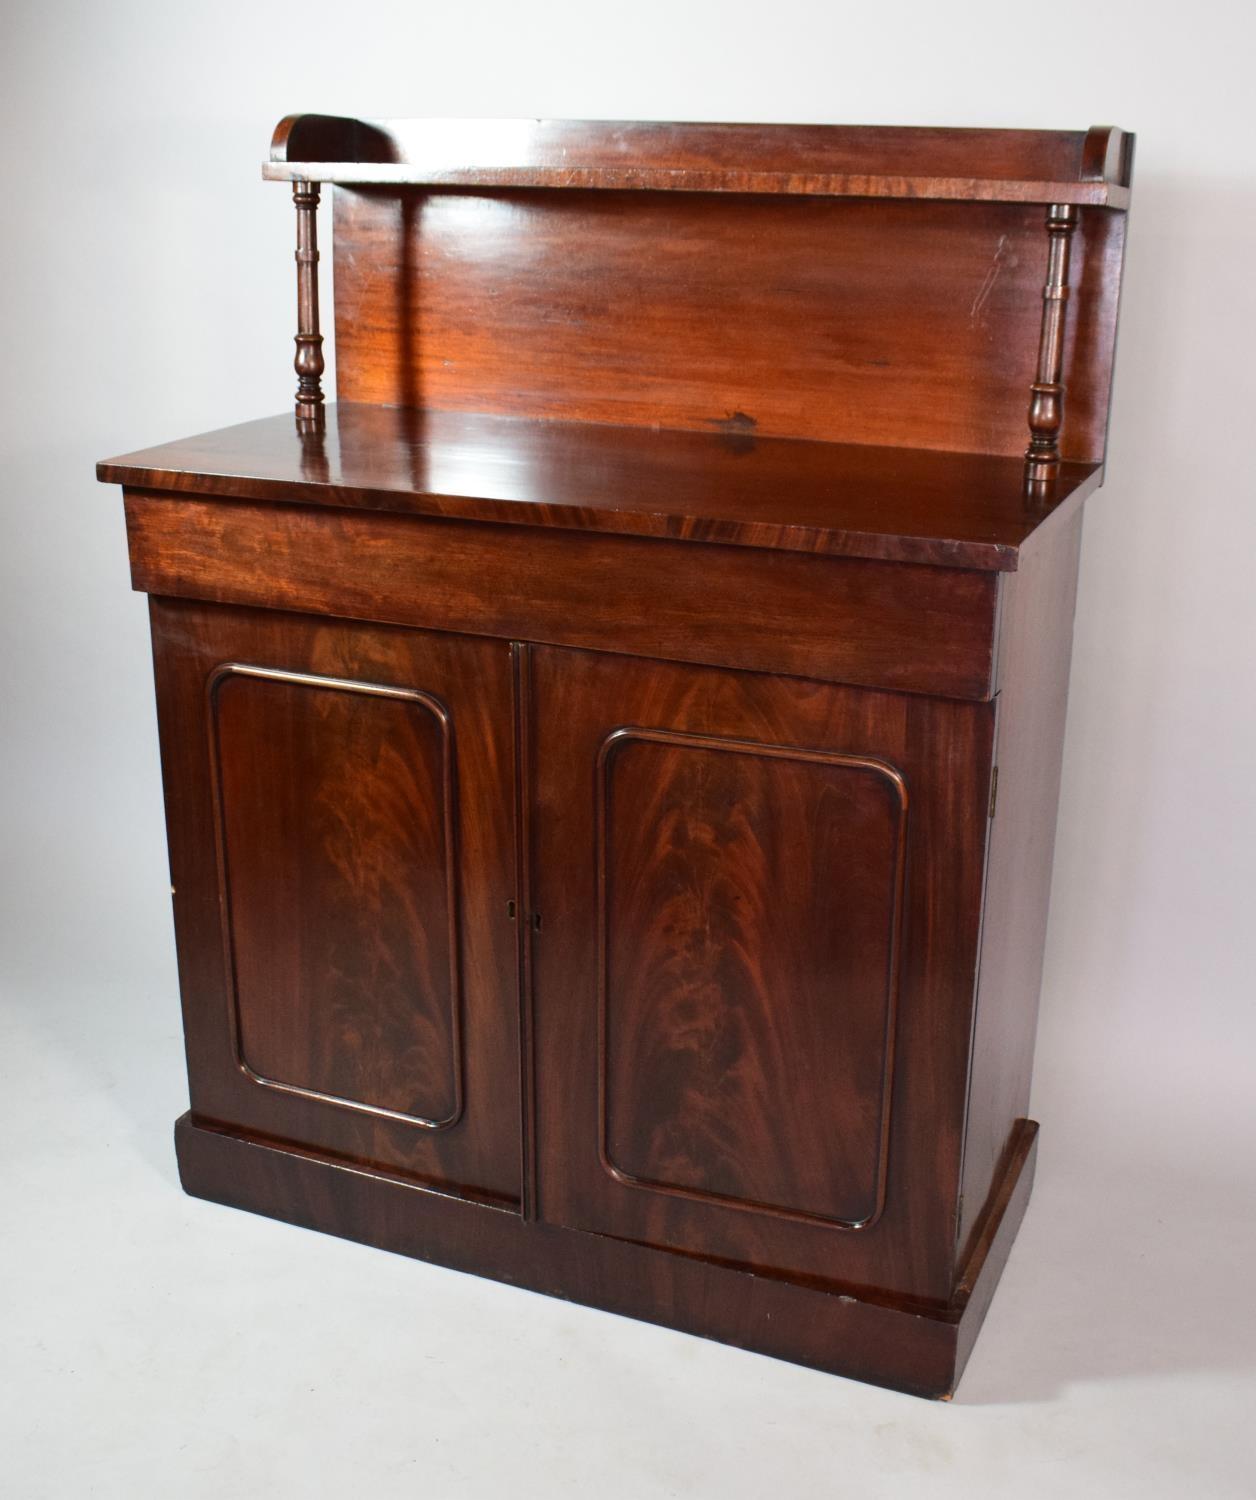 A Victorian Mahogany Buffet having Galleried Back with Turned Spindle Supports and Single Shelved - Image 2 of 3